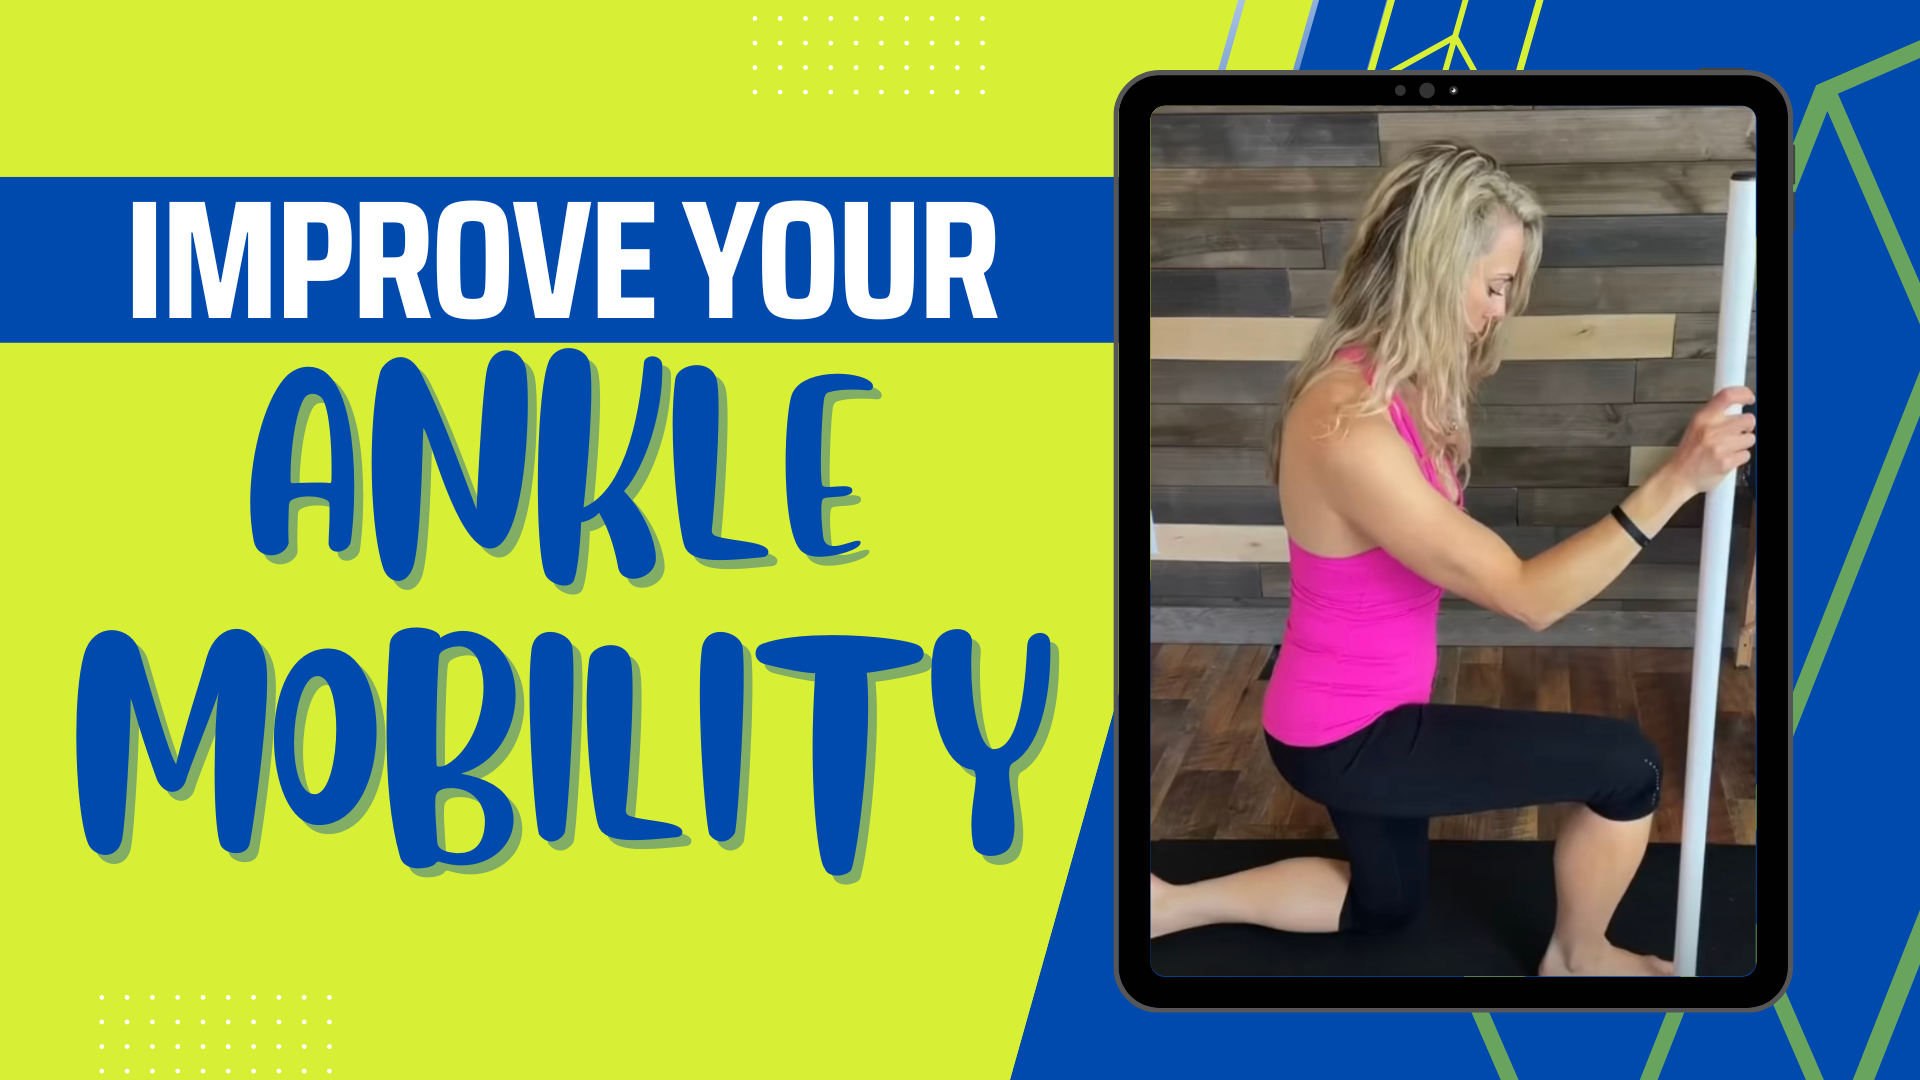 How to improve your ankle mobility